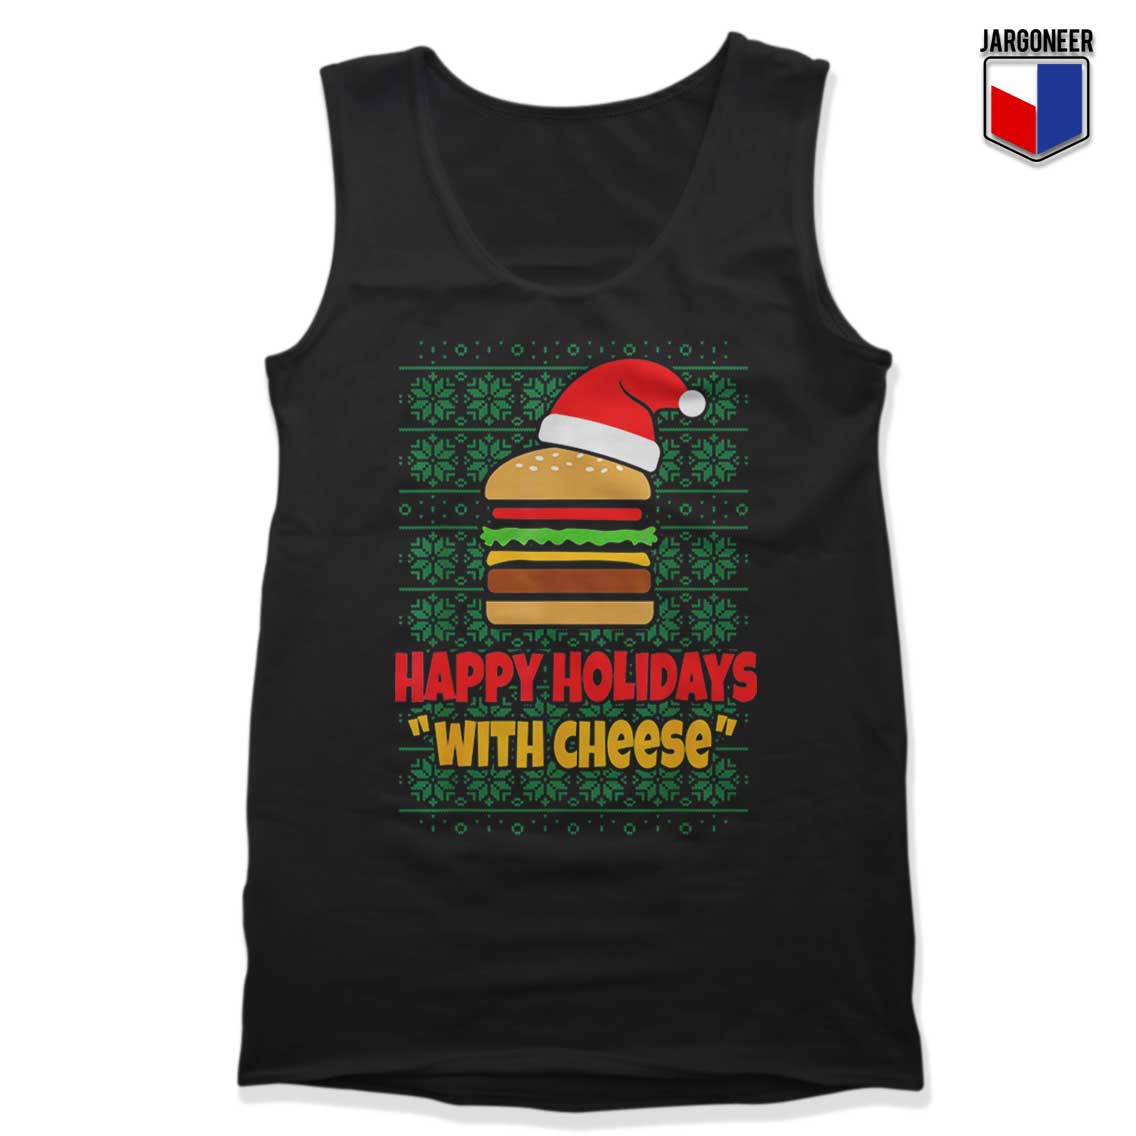 Happy Holidays With Cheese Christmas Tank Top - Shop Unique Graphic Cool Shirt Designs